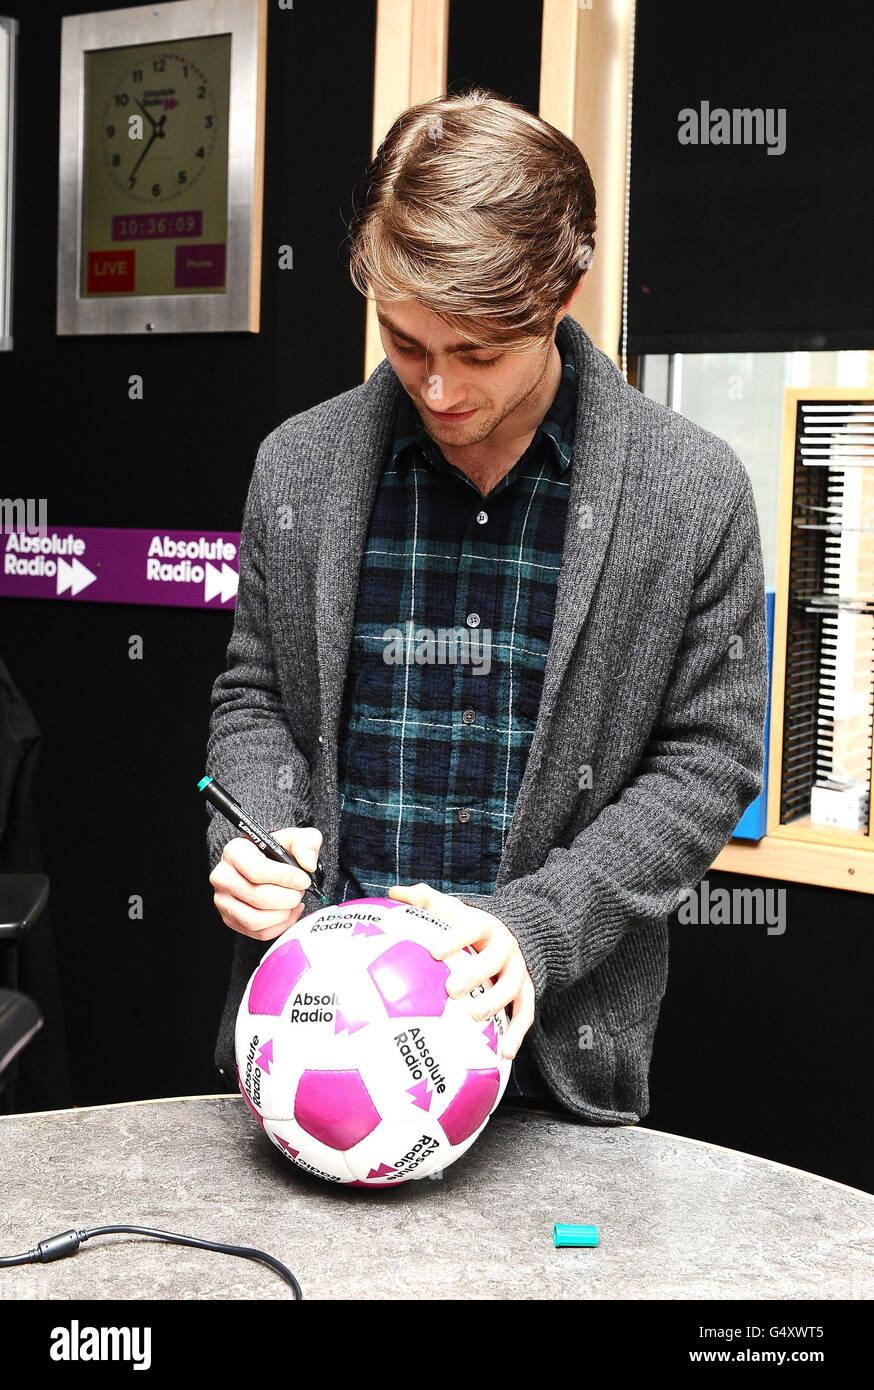 Daniel Radcliffe at Absolute Radio - London. Daniel Radcliffe signs a  football after recording the Dave Gorman Show on Absolute Radio in London  Stock Photo - Alamy